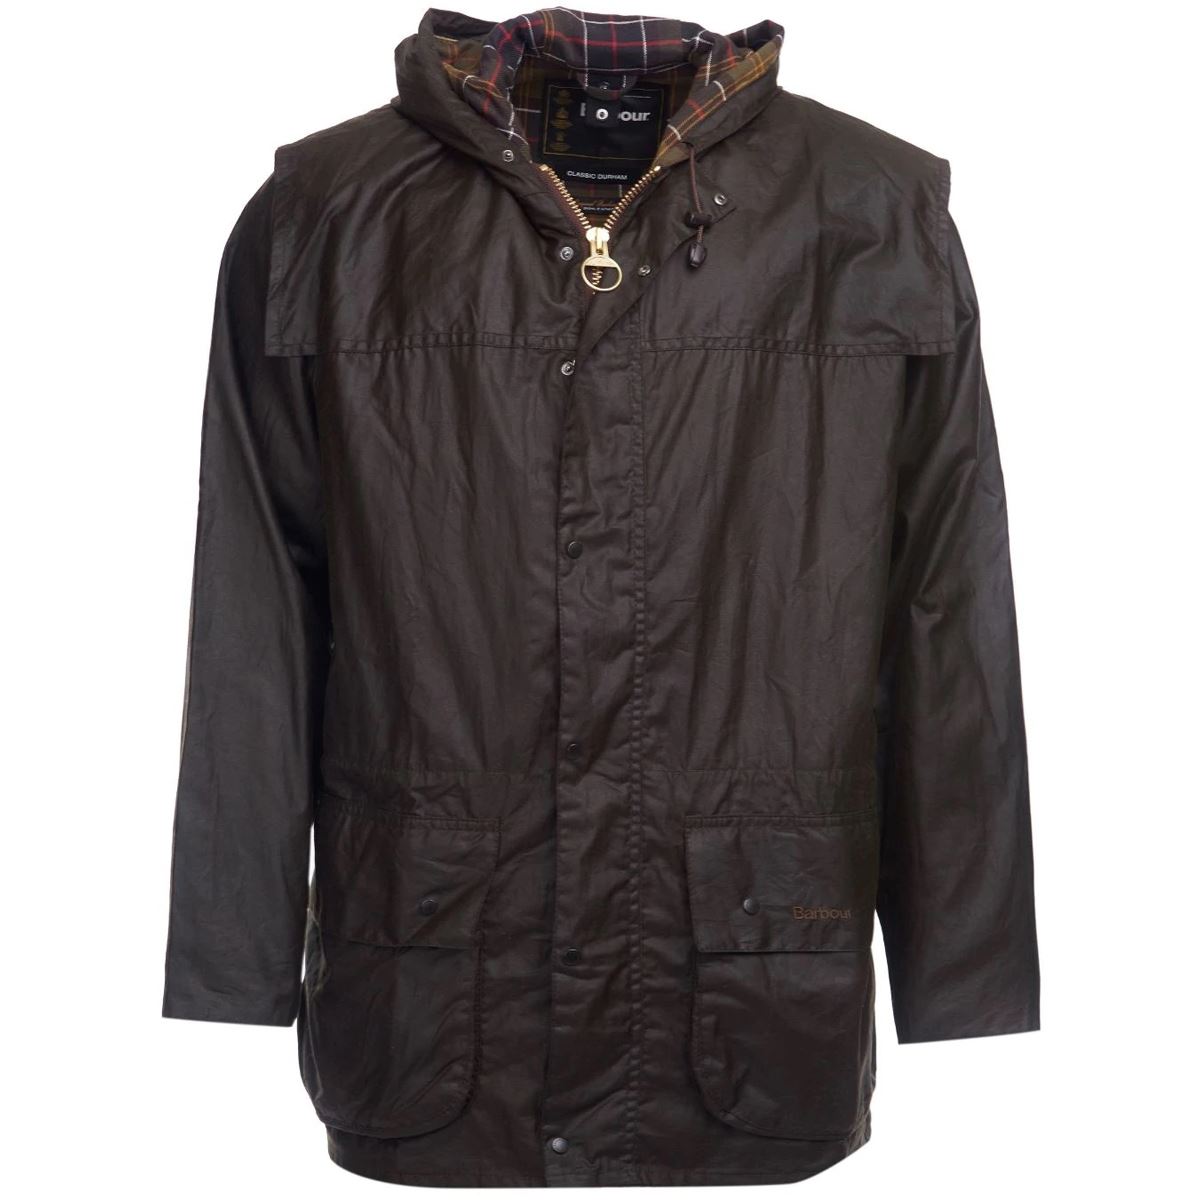 Does the Barbour Durham Jacket protect against the elements?